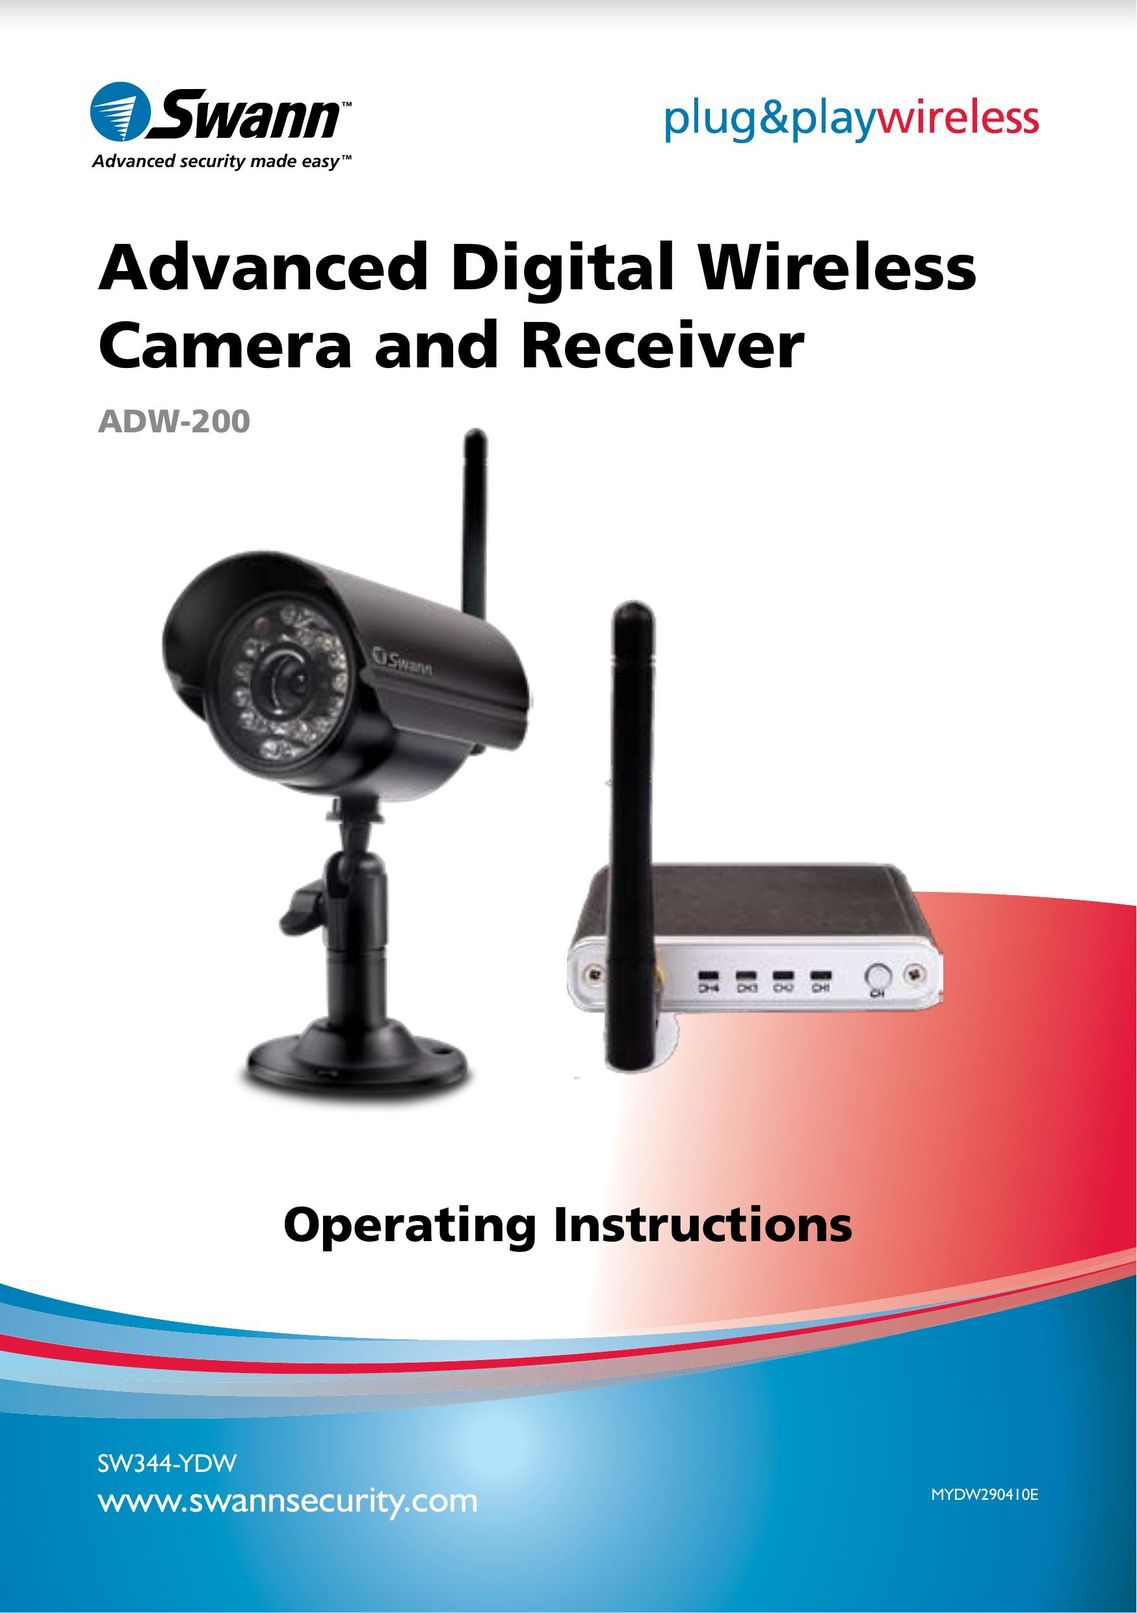 Swann ADW-200 Home Security System User Manual